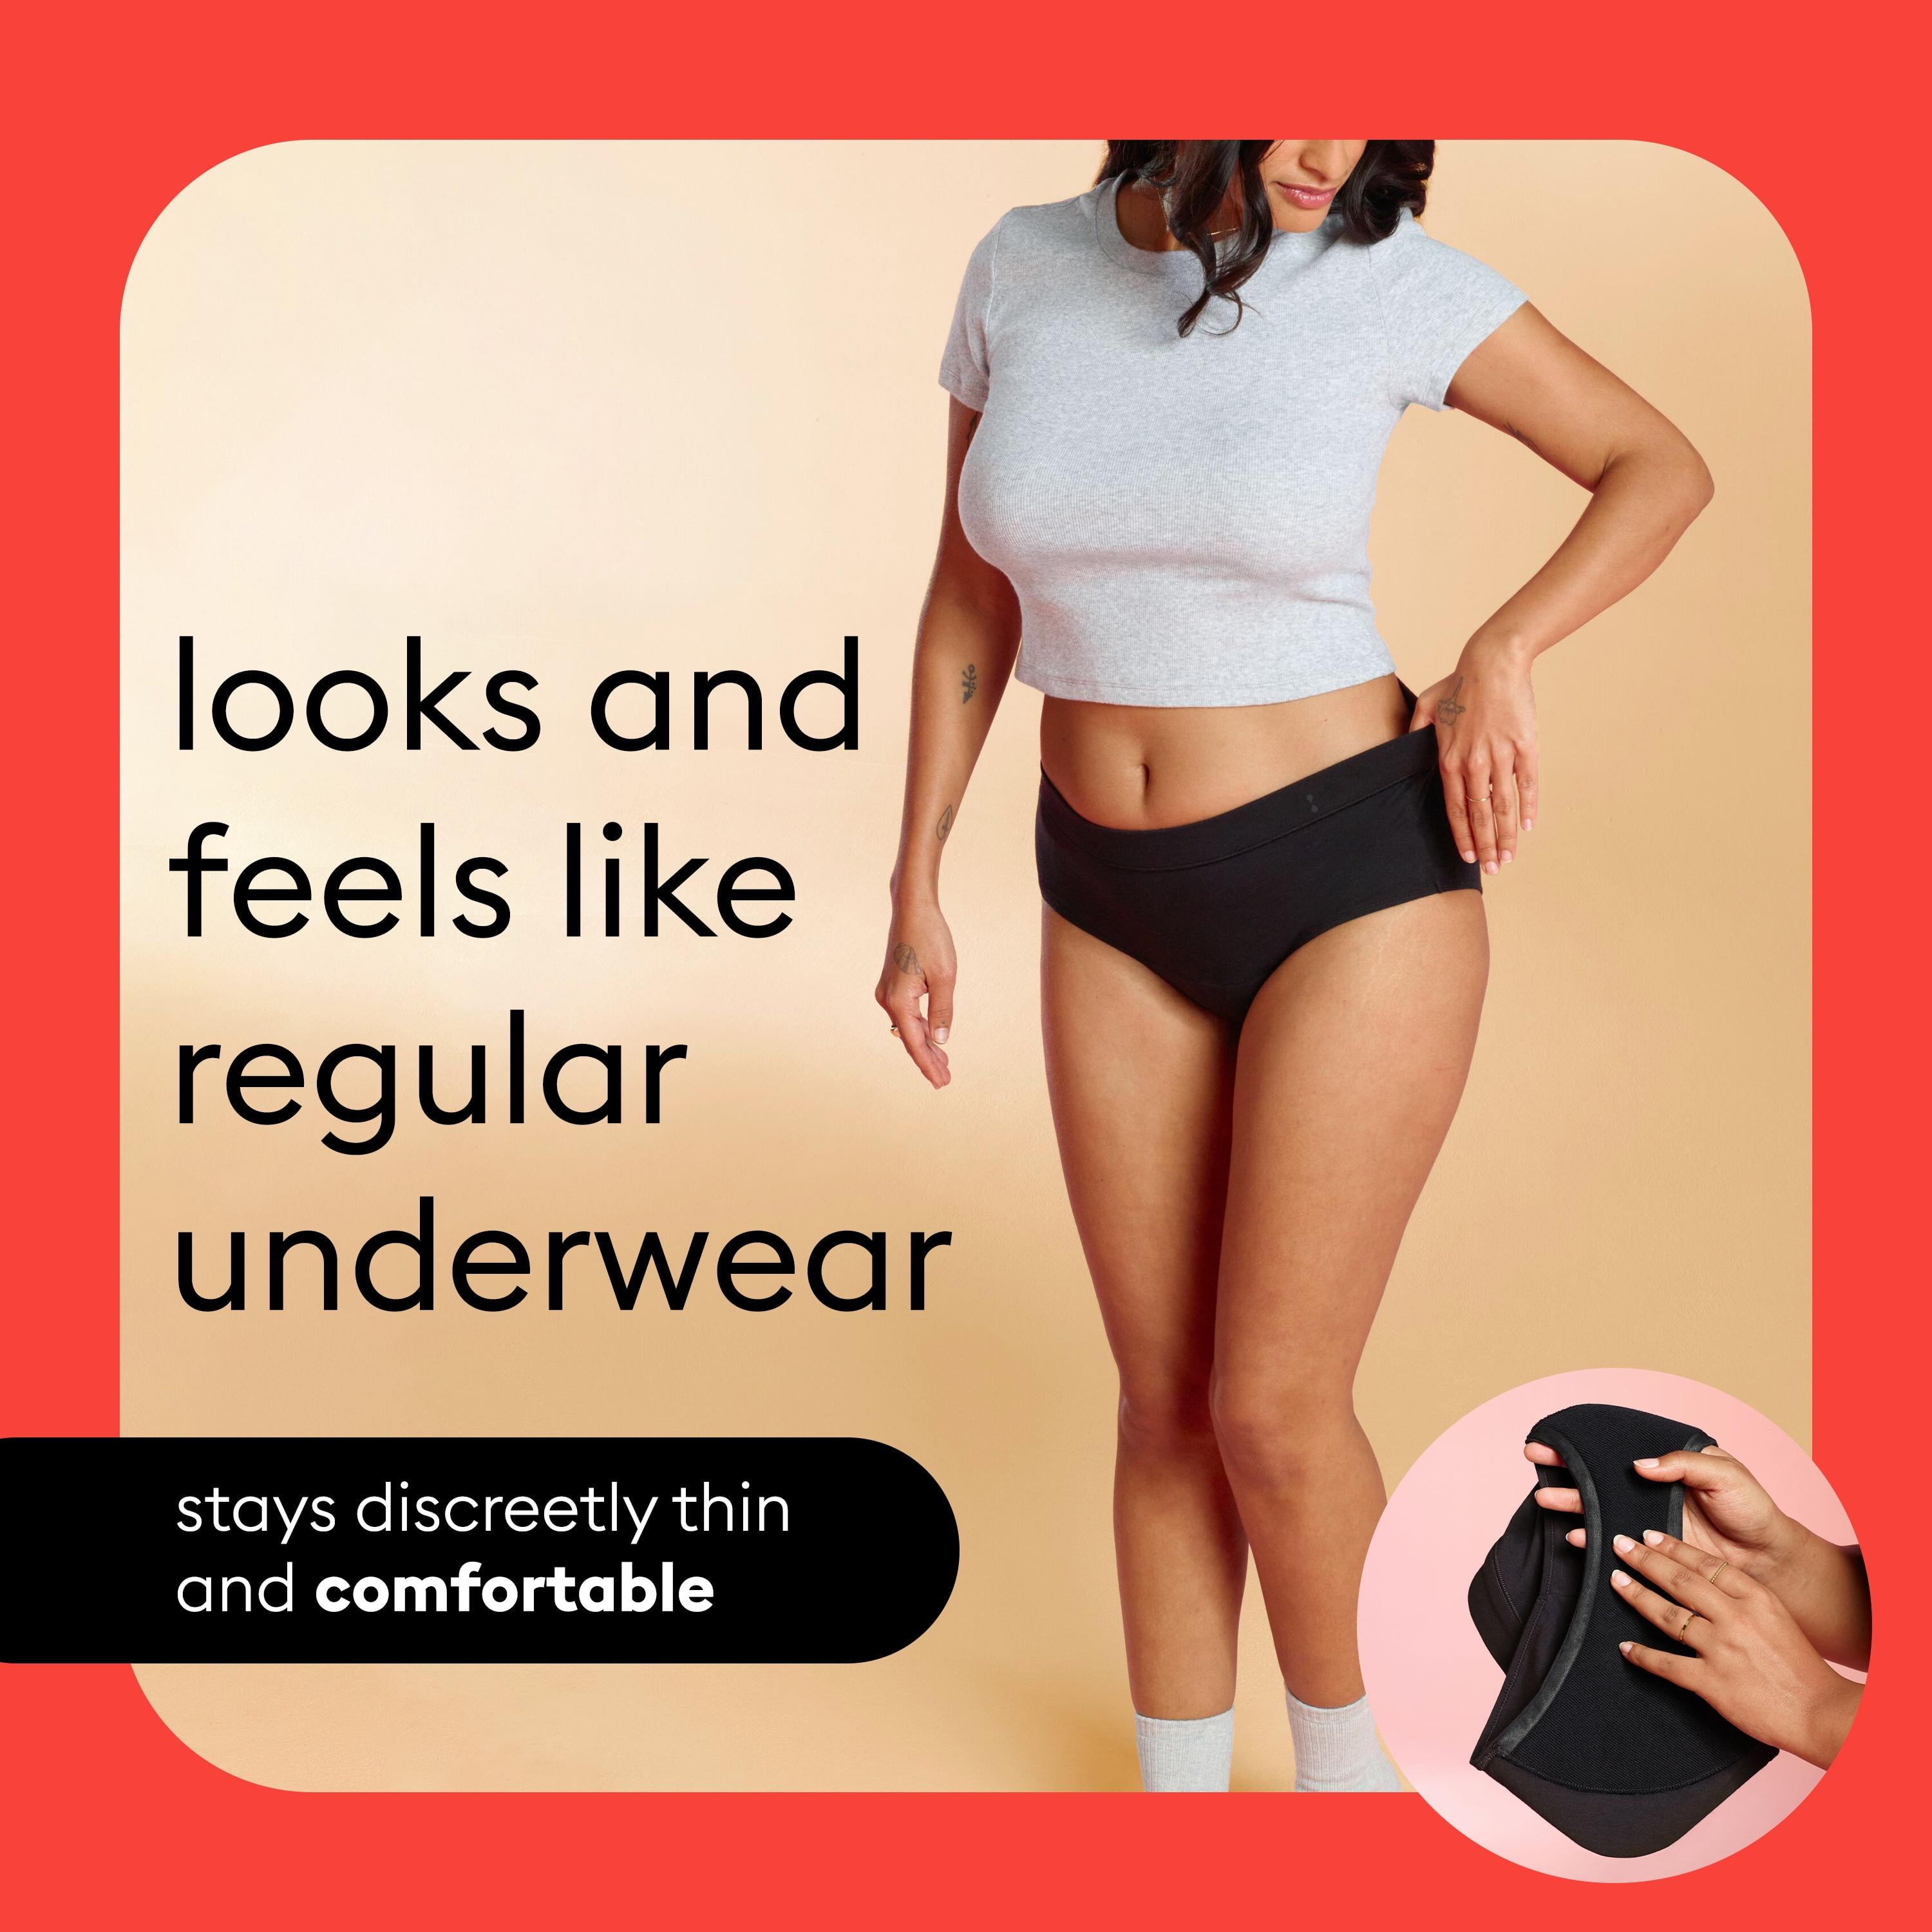 Don't let your period get in the way of your party plans! Complete your New  Year's outfit with a comfy pair of Thinx 💫